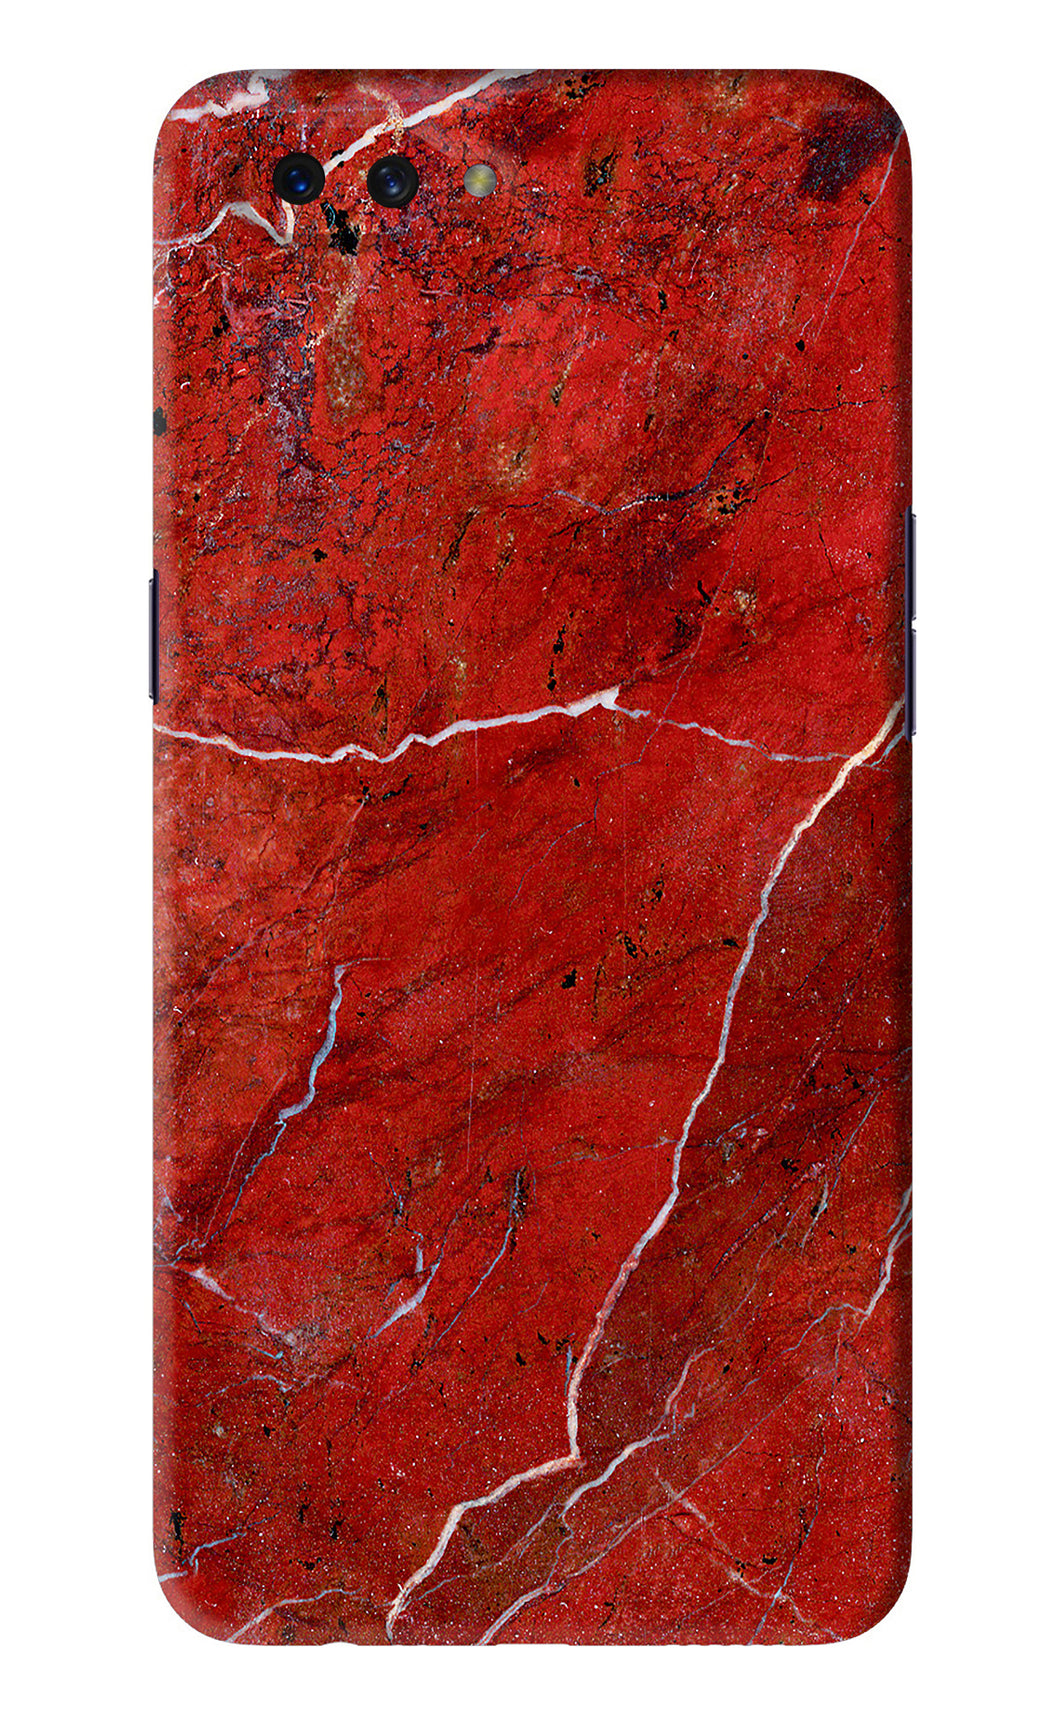 Red Marble Design Oppo A3S Back Skin Wrap